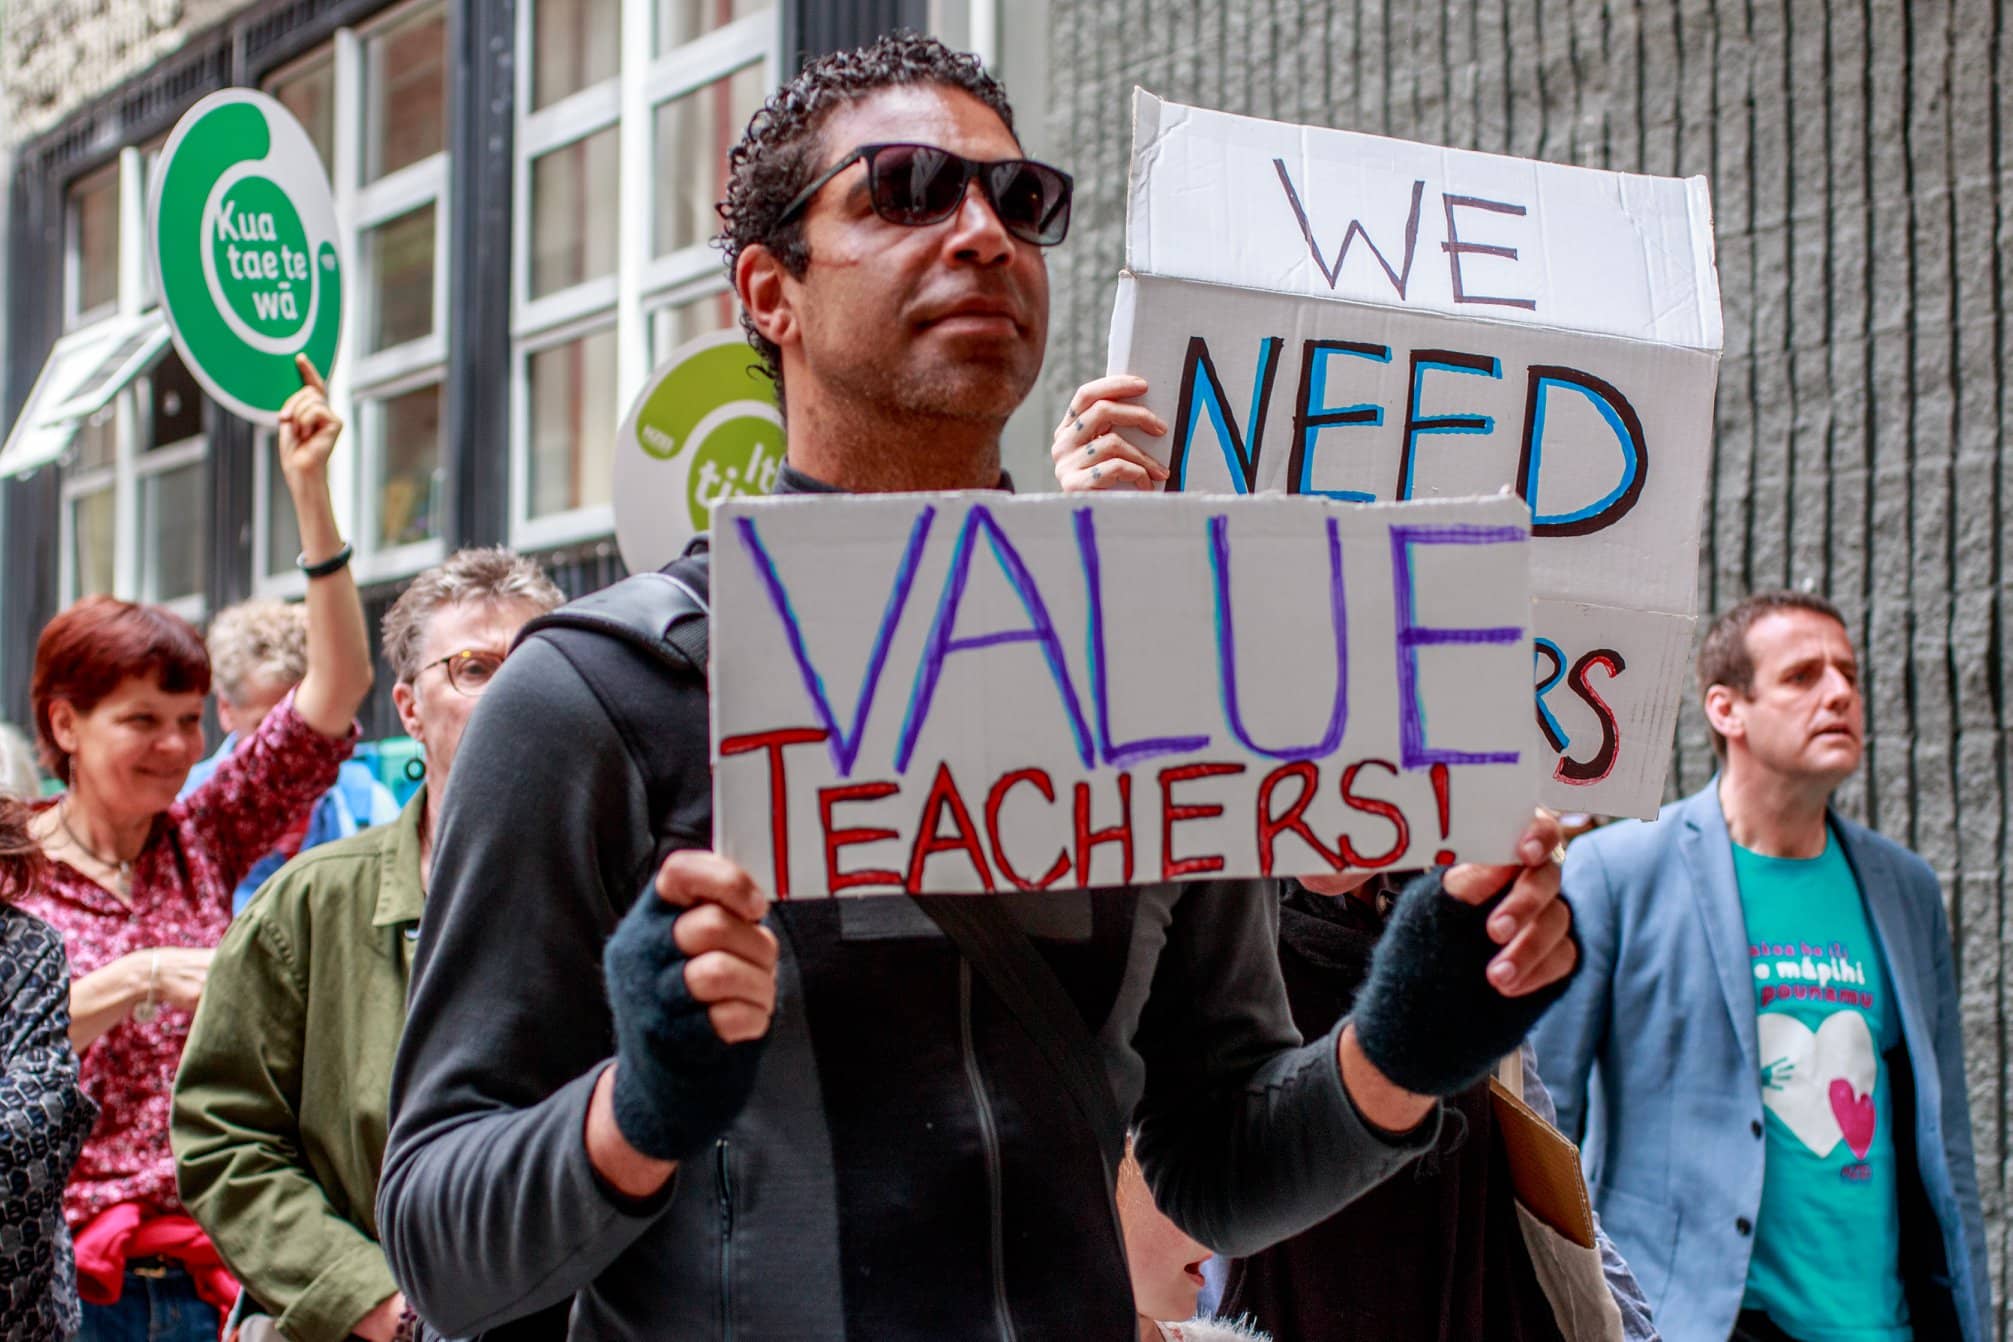 People march down the streets of Wellington, and we see the close up of several dedicated volunteers or teachers raising signs, "Value teachers", and "We need teachers"